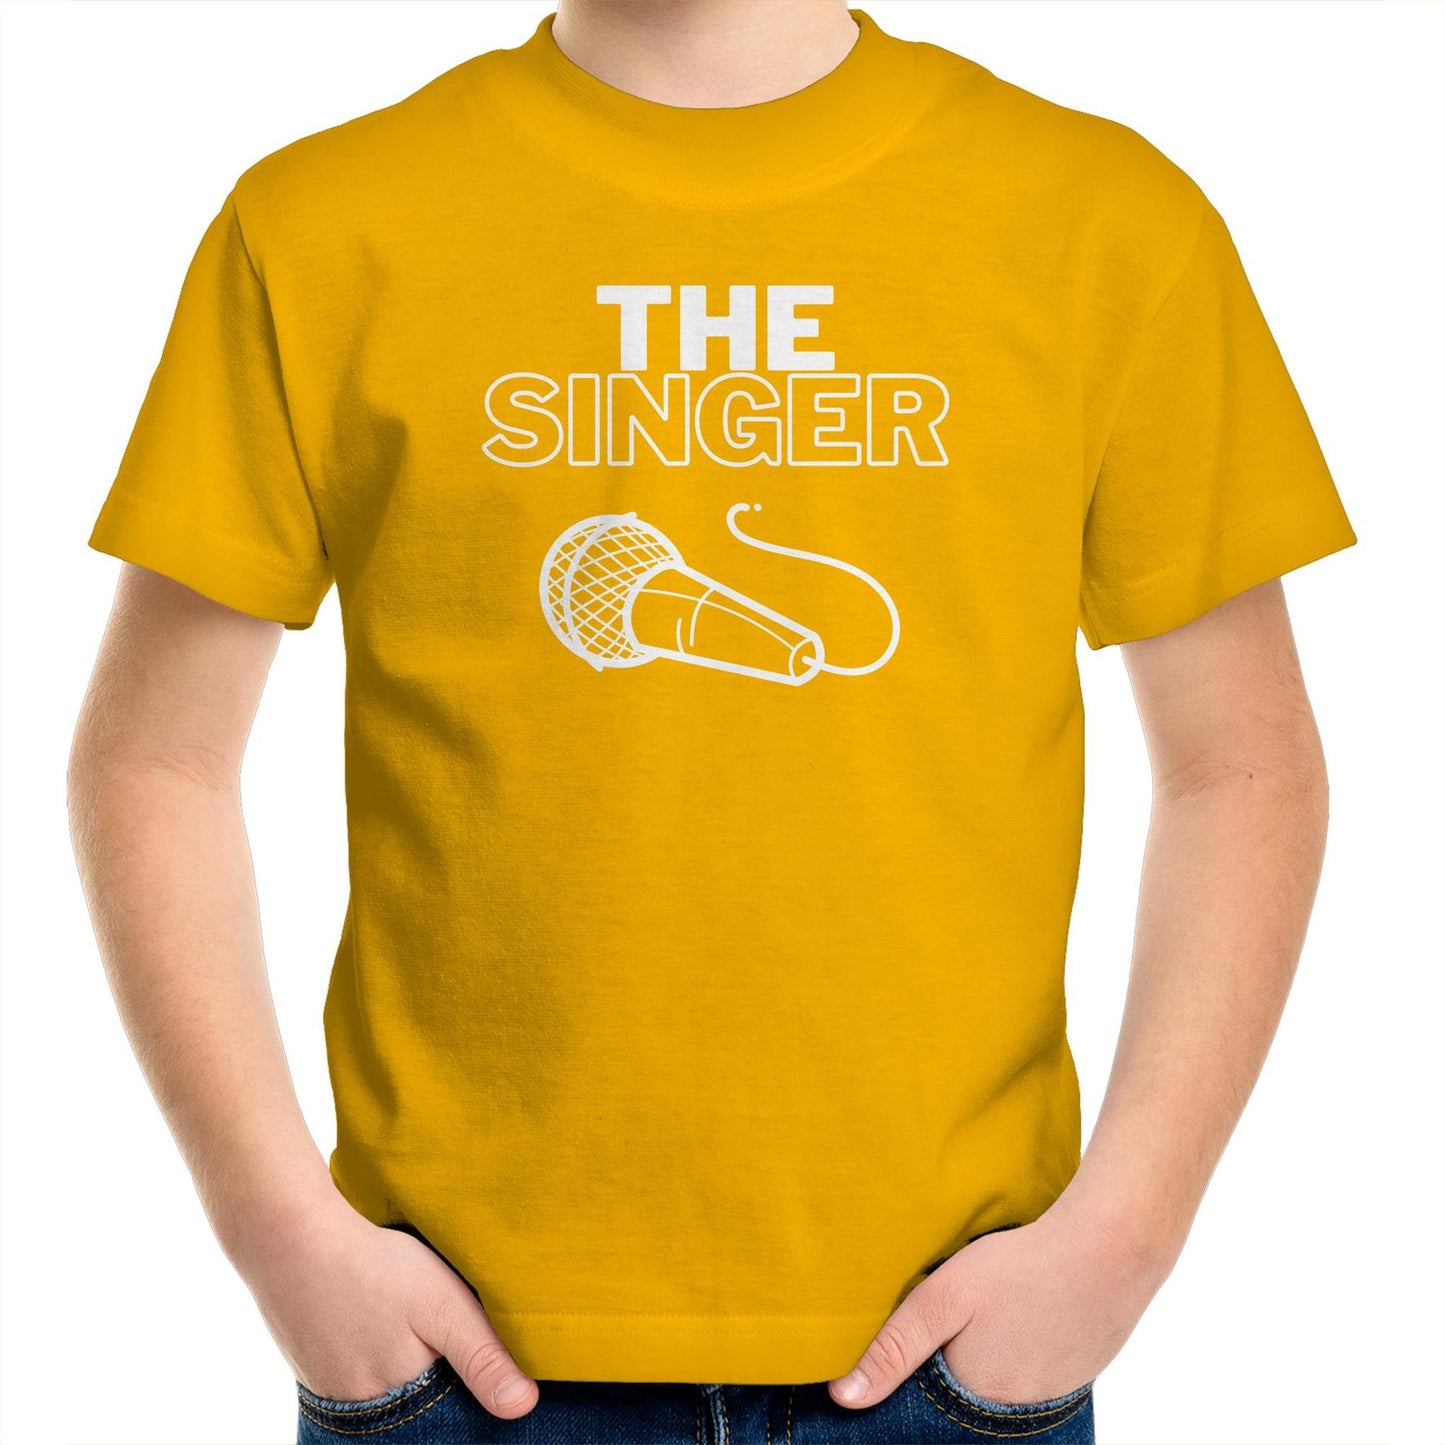 The Singer - Kids Youth T-Shirt Gold Kids Youth T-shirt Music